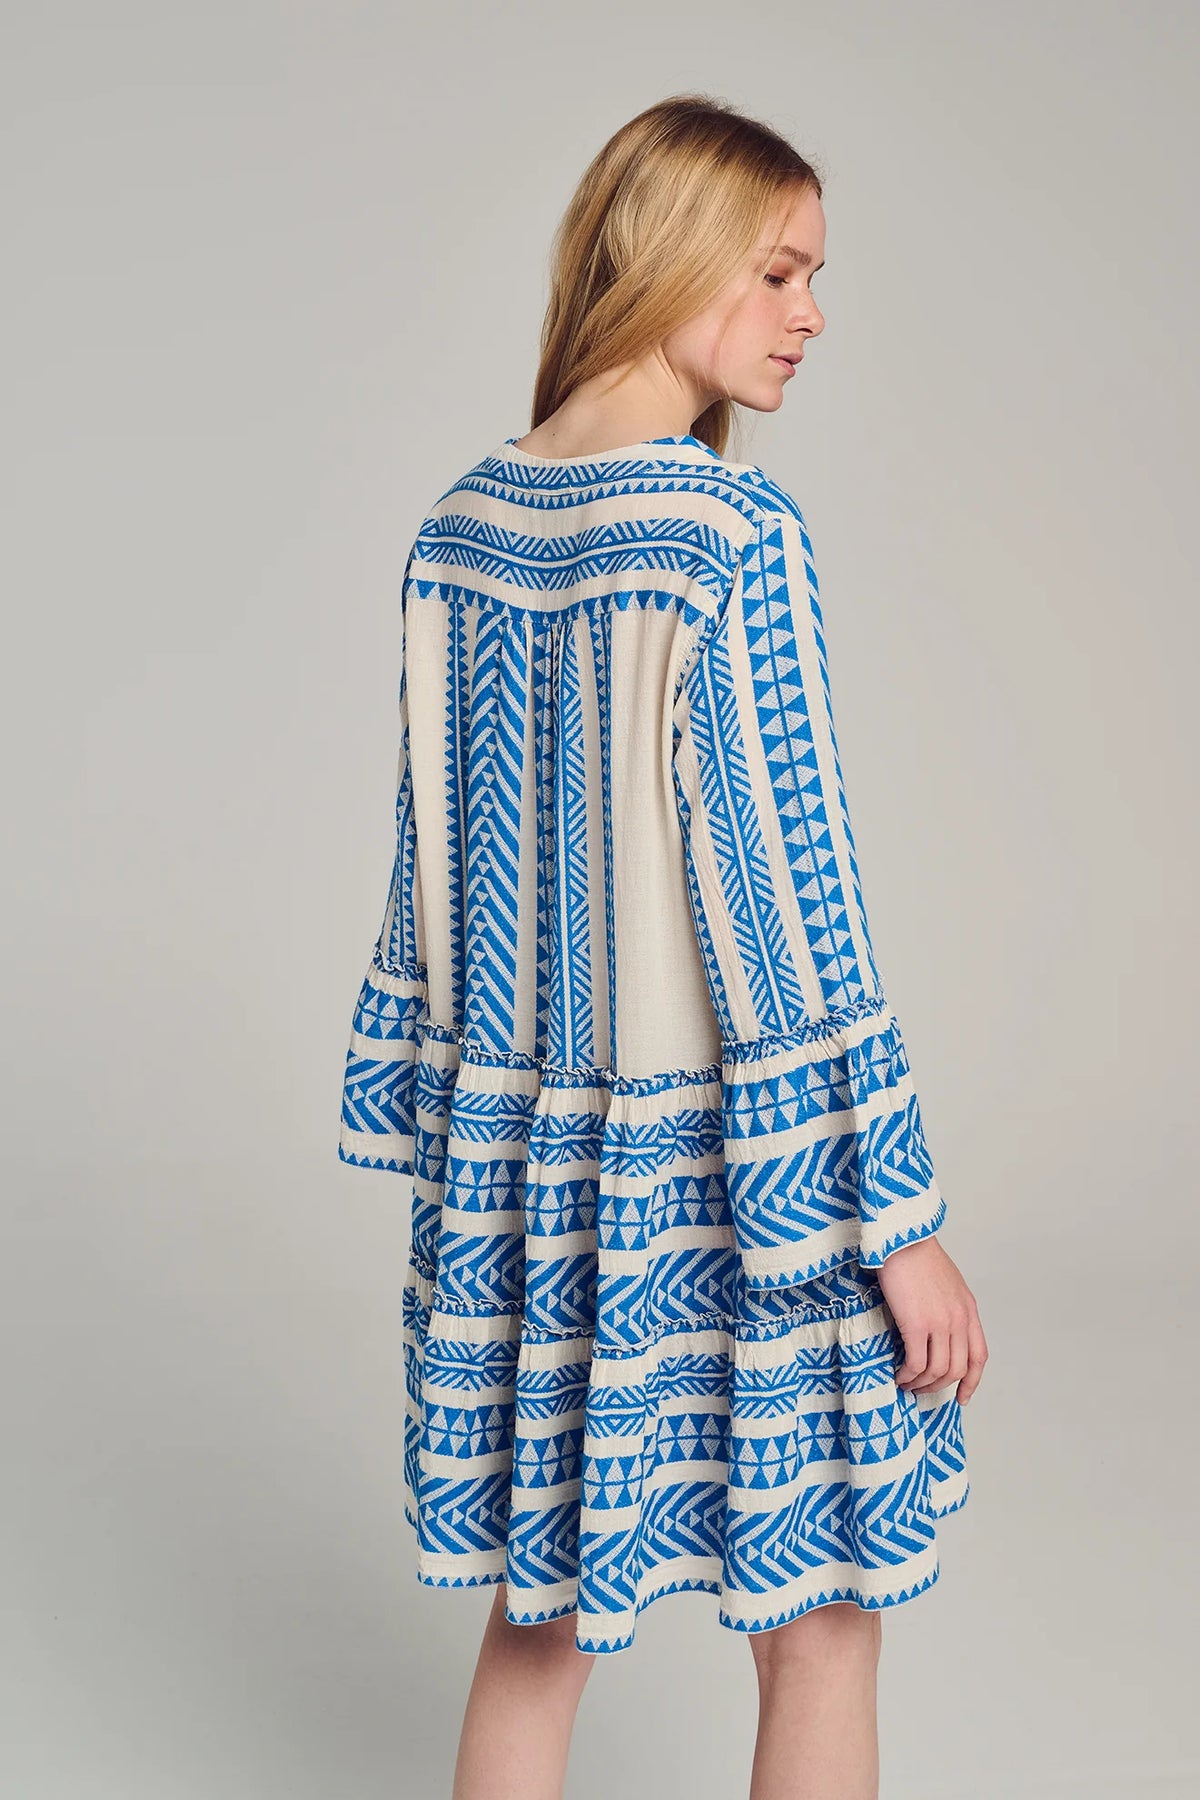 Ecru base short dress with panelled skirt and fluted bracelet length sleeves with blue geometric all over embroidery